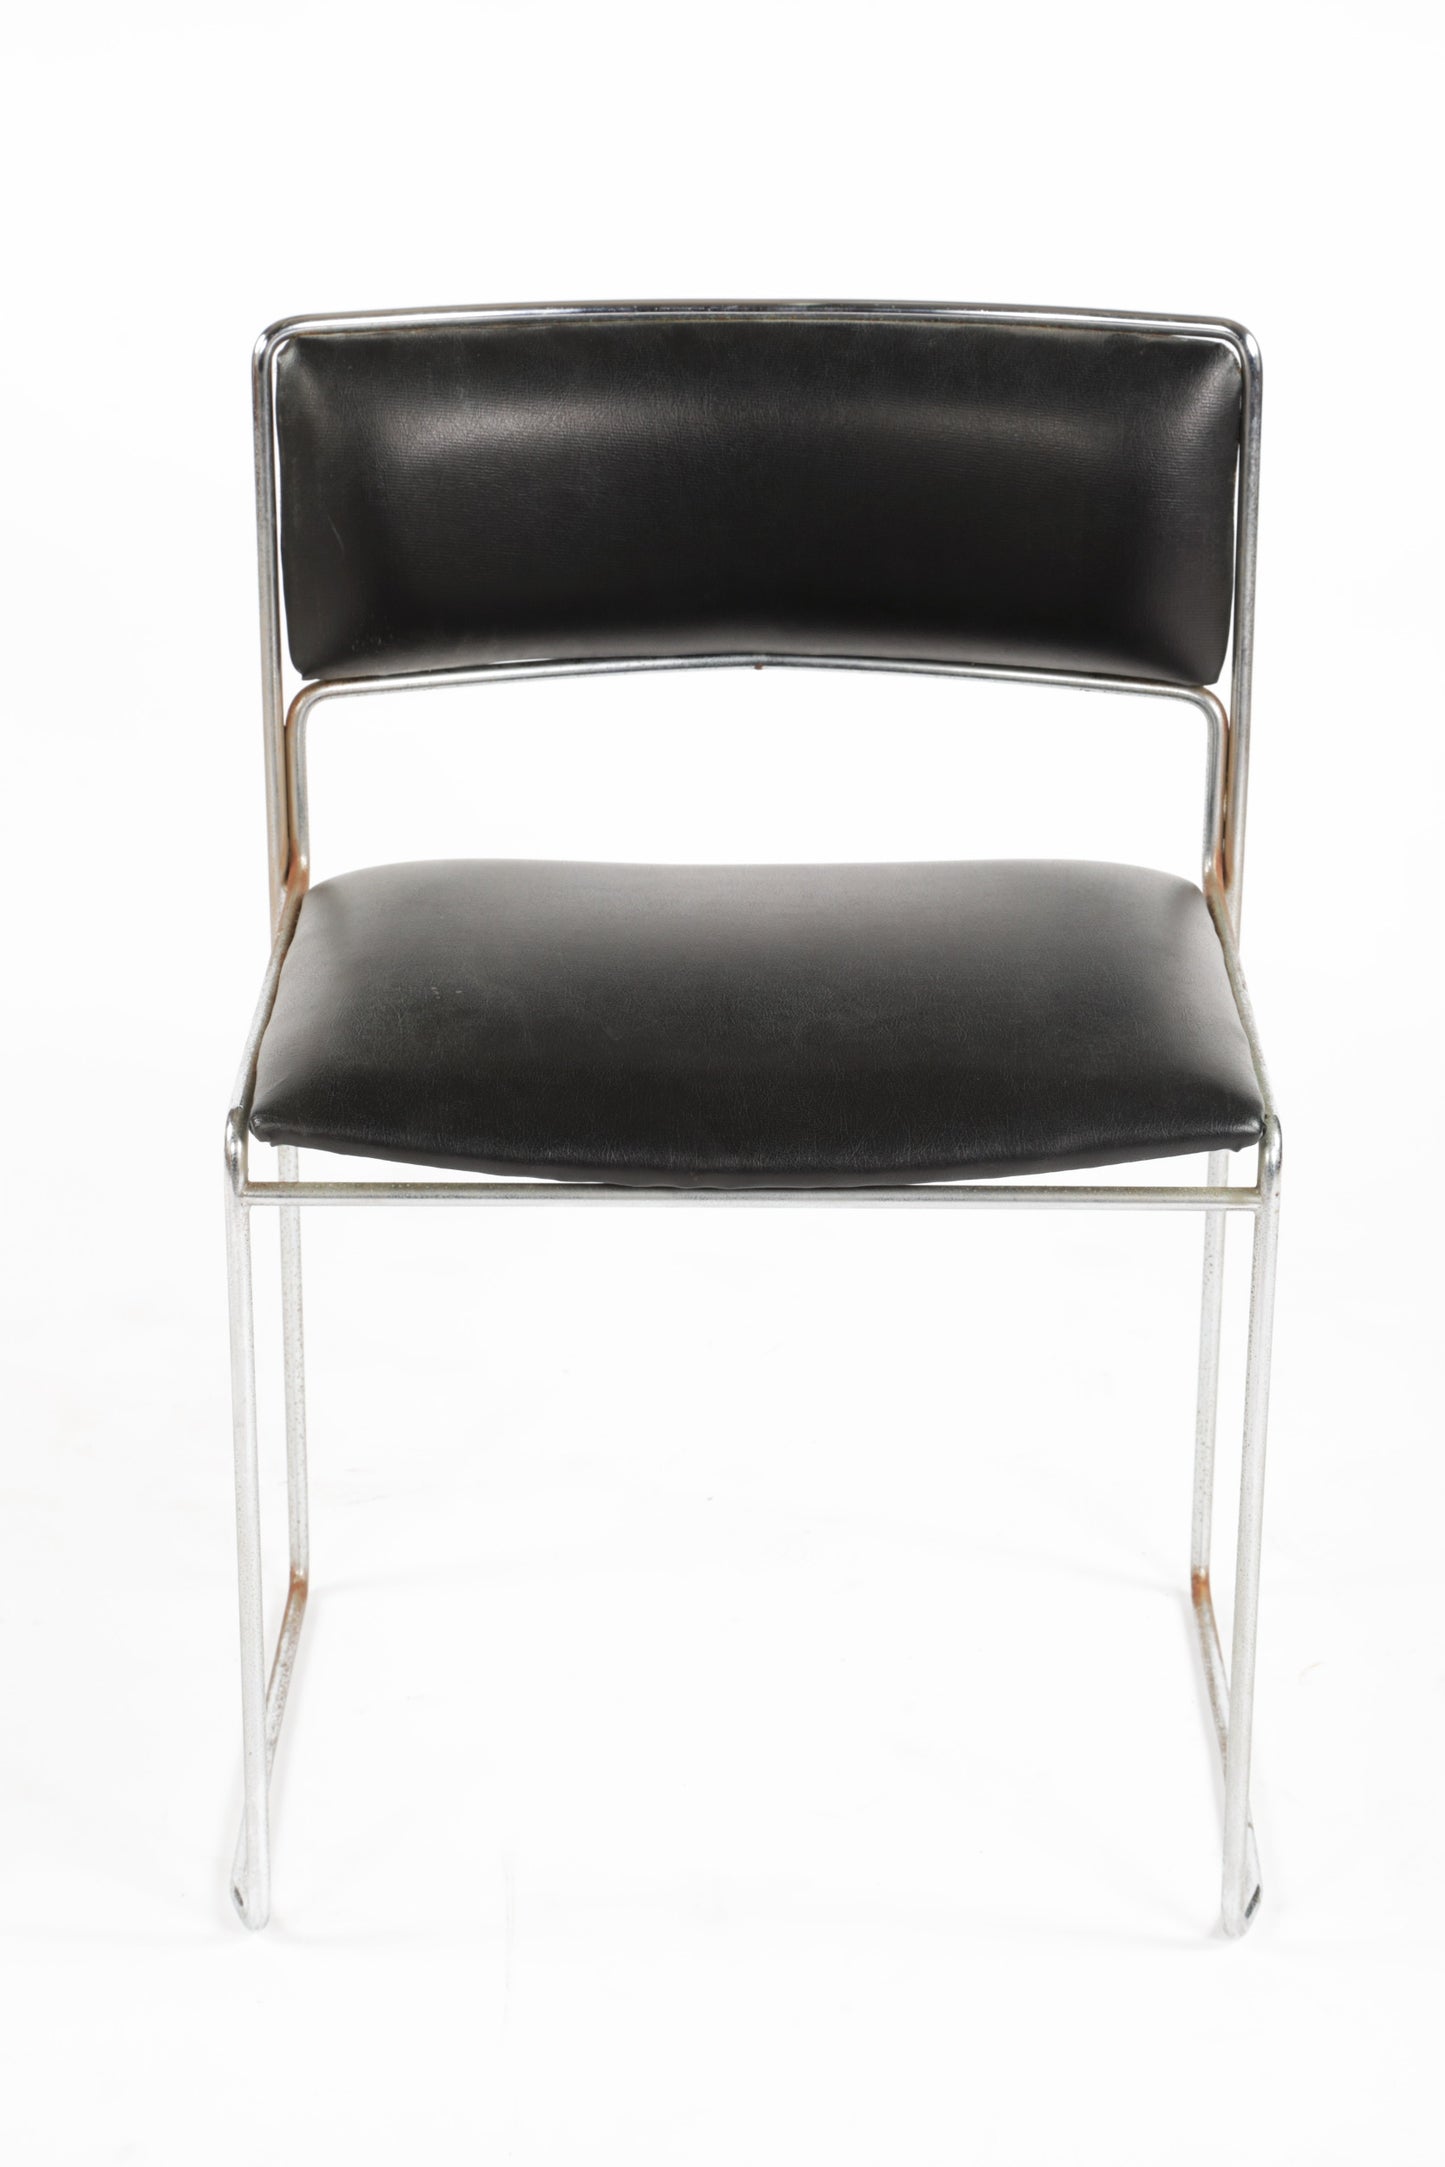 Six black leather chairs